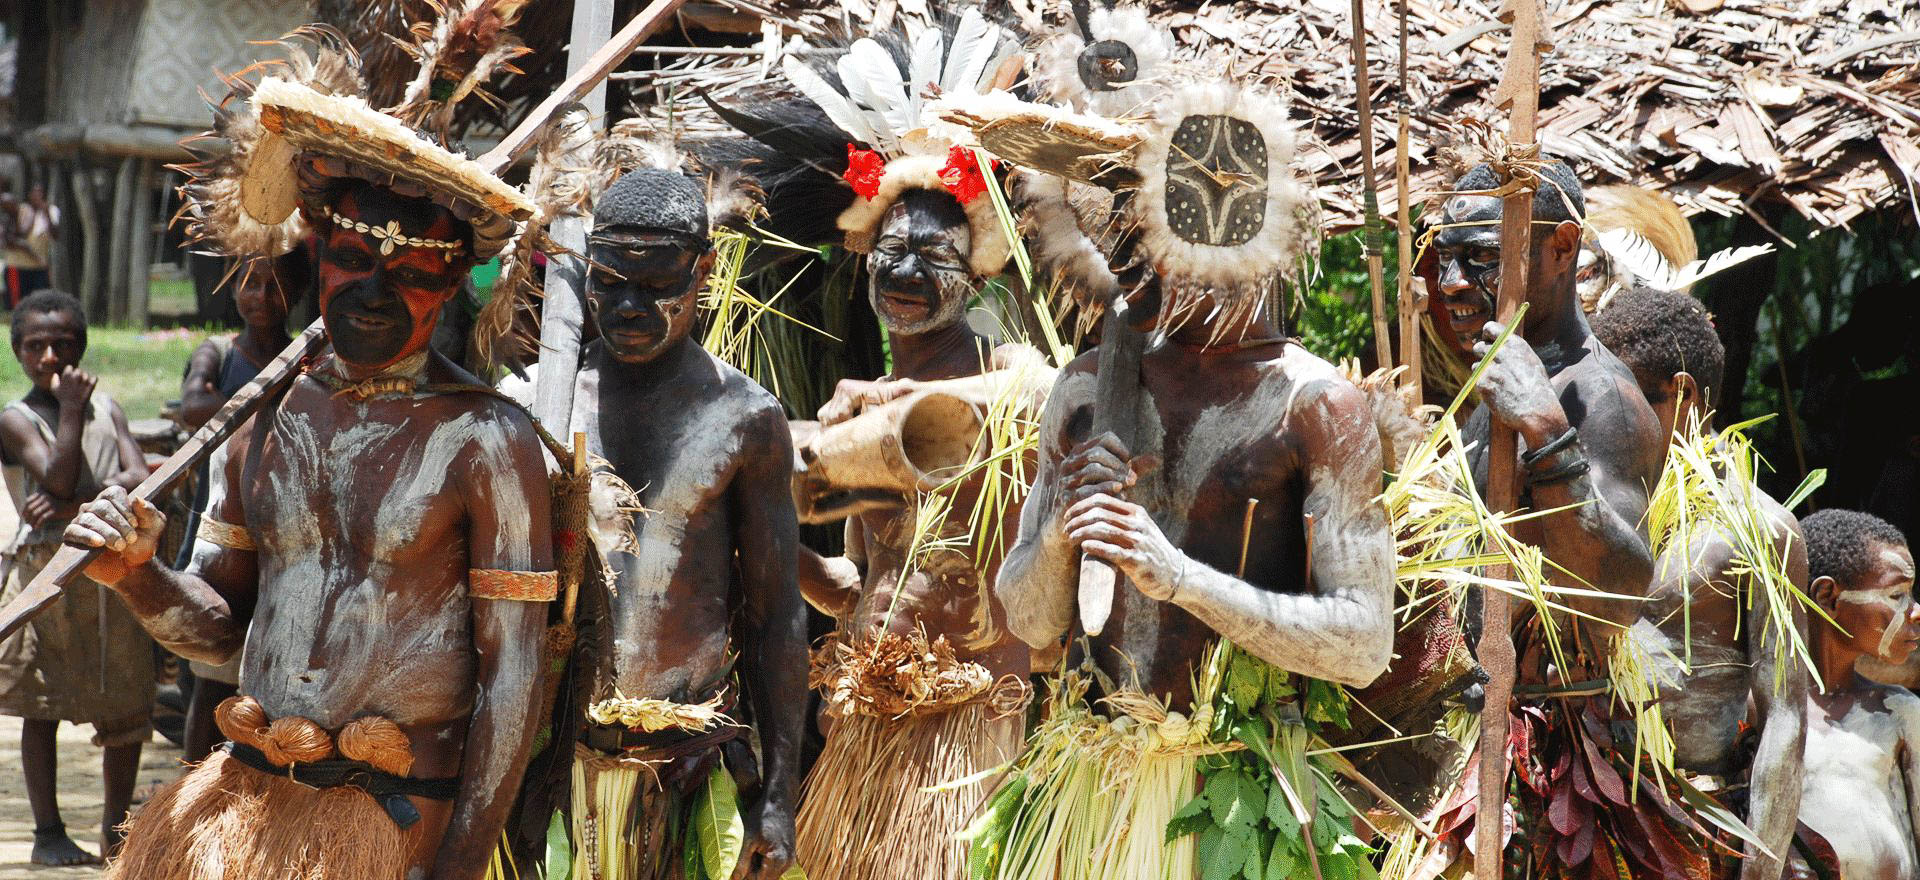 Men performing traditional dance on the Sepik River - Papua New Guinea Holidays and Tours